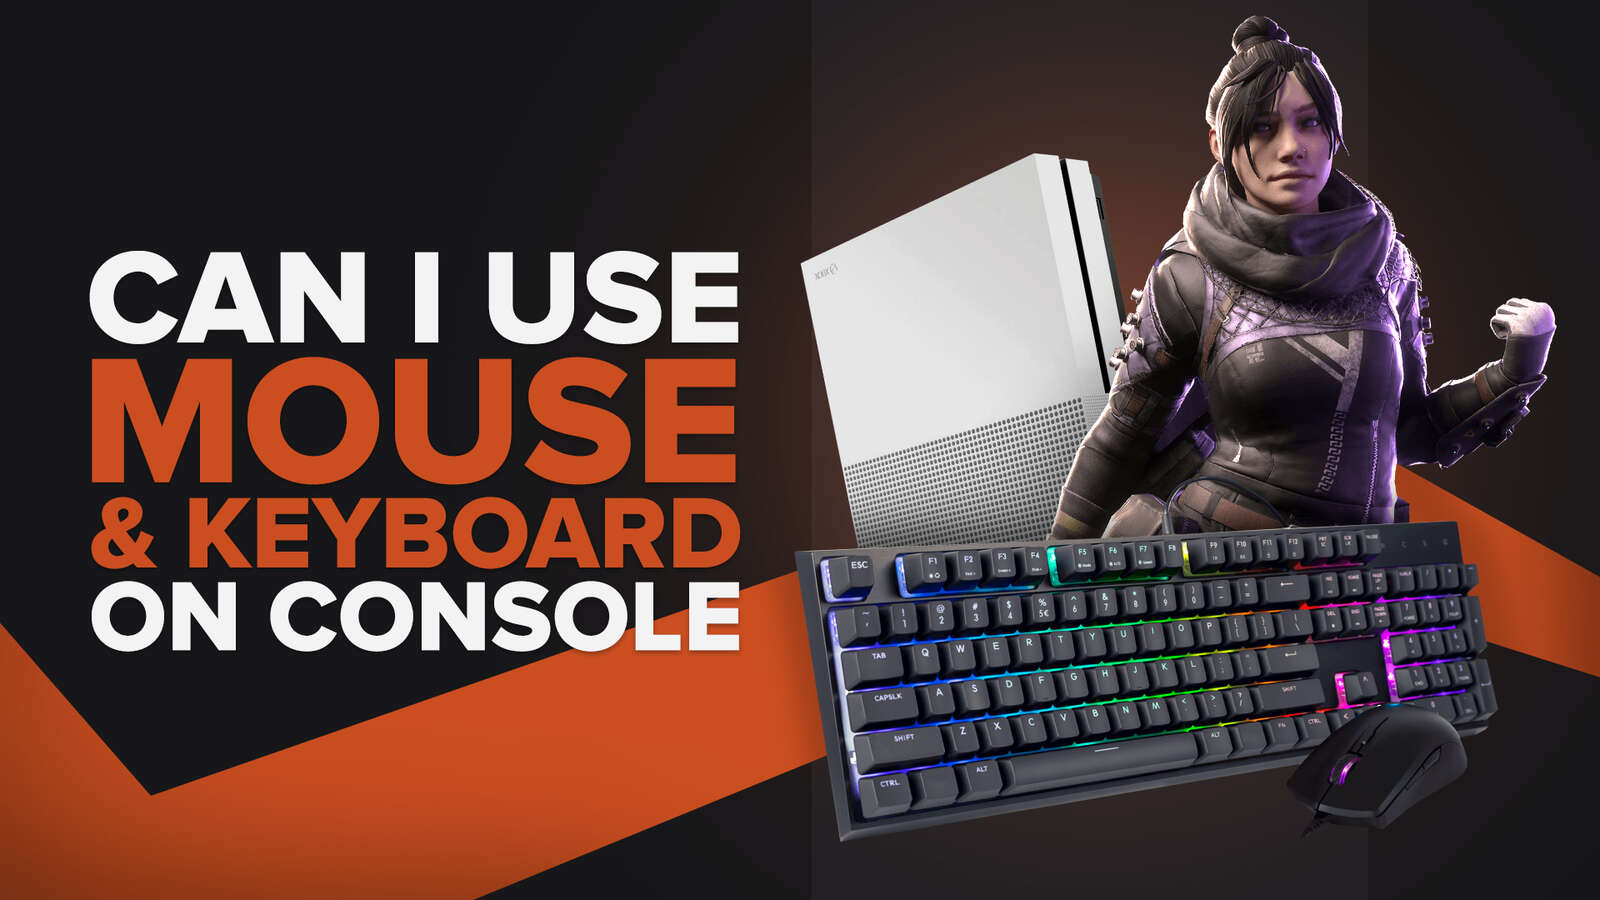 Can I use the mouse and keyboard on console to play Apex Legends? [Answered]